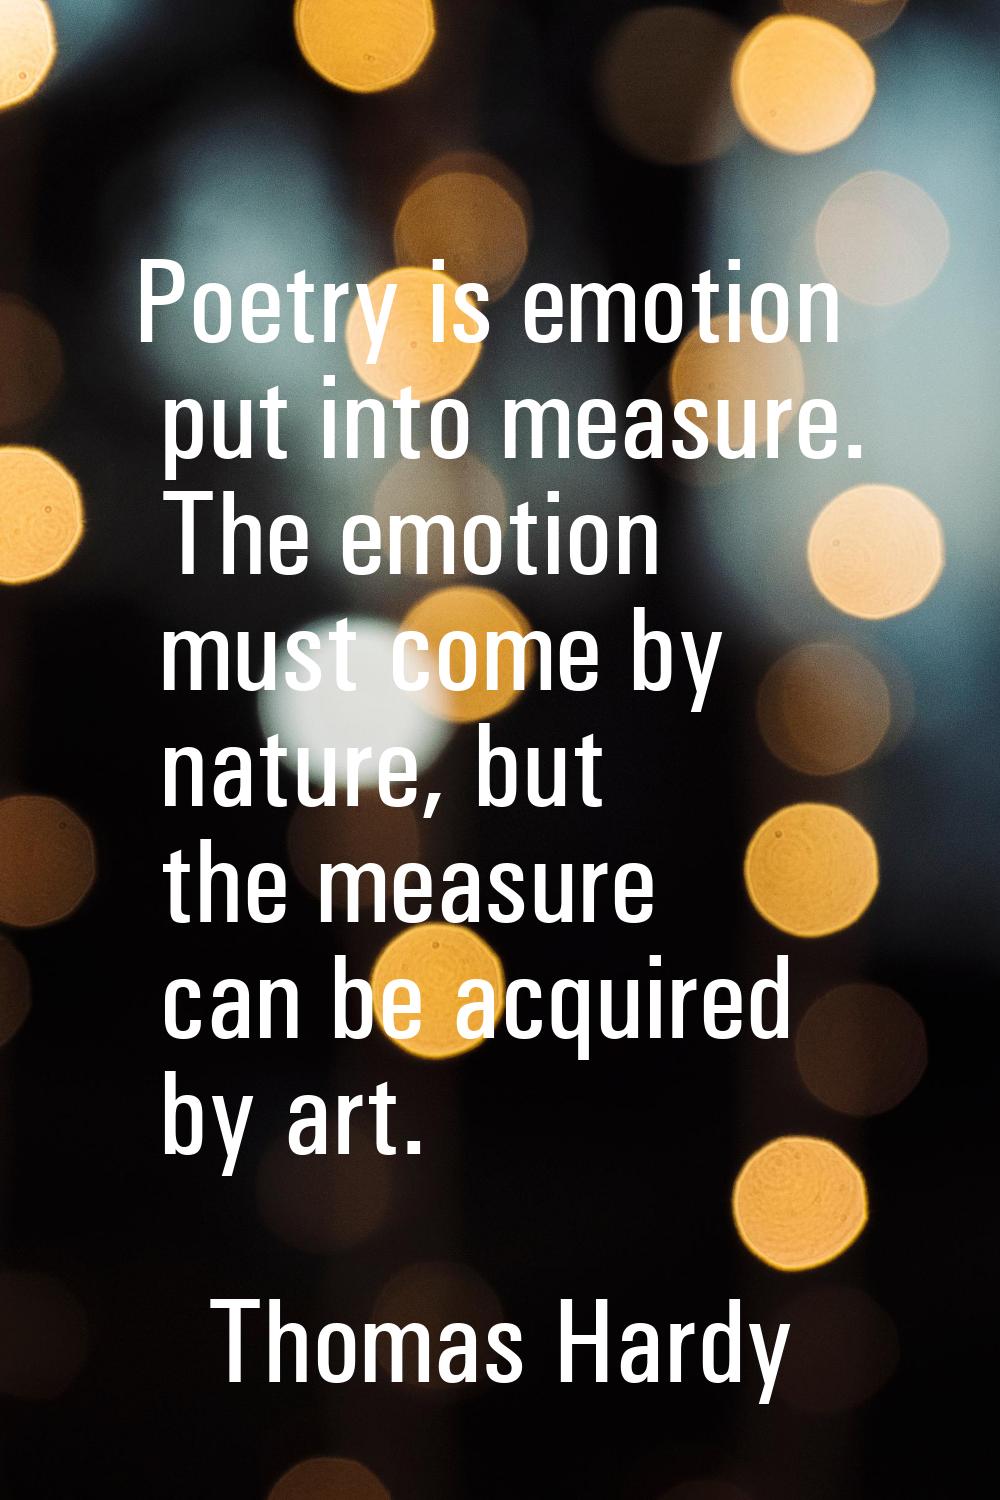 Poetry is emotion put into measure. The emotion must come by nature, but the measure can be acquire